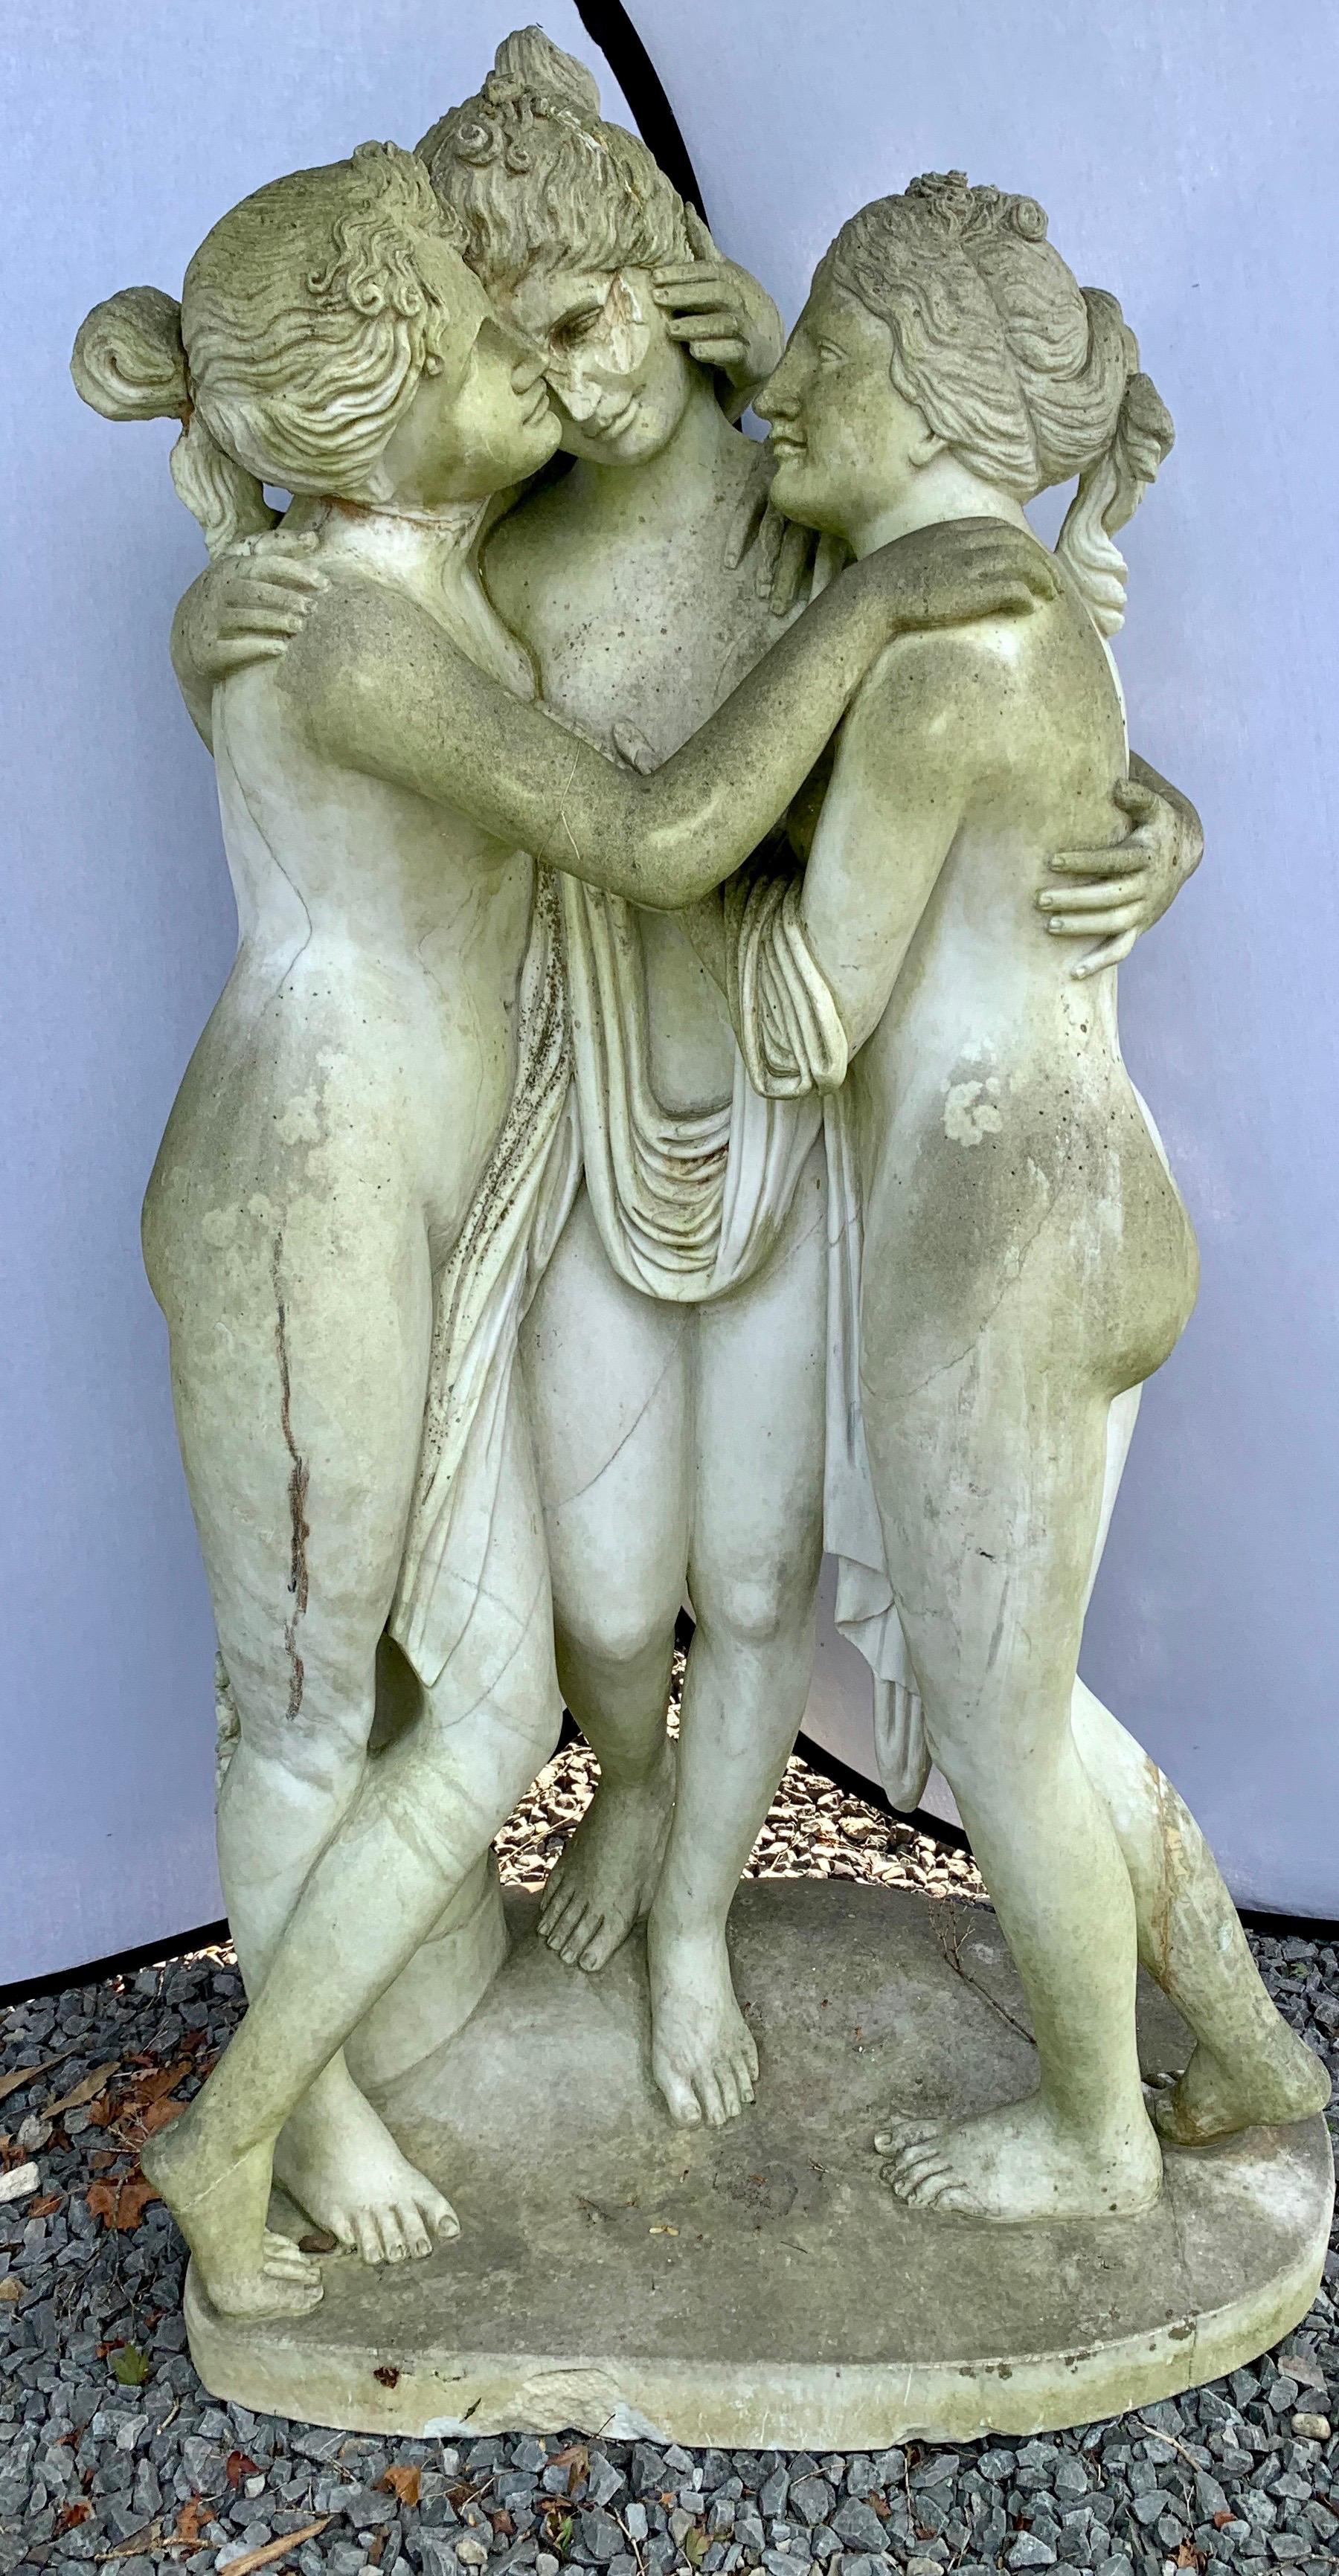 Life size marble statue depicting the Three Graces. According to Greek mythology, they were nymphs and goddesses that were the daughters of Zeus and the sea nymph Eurynome. Their names were Aglaia, Thalia, and Euphrosyne, and they were the